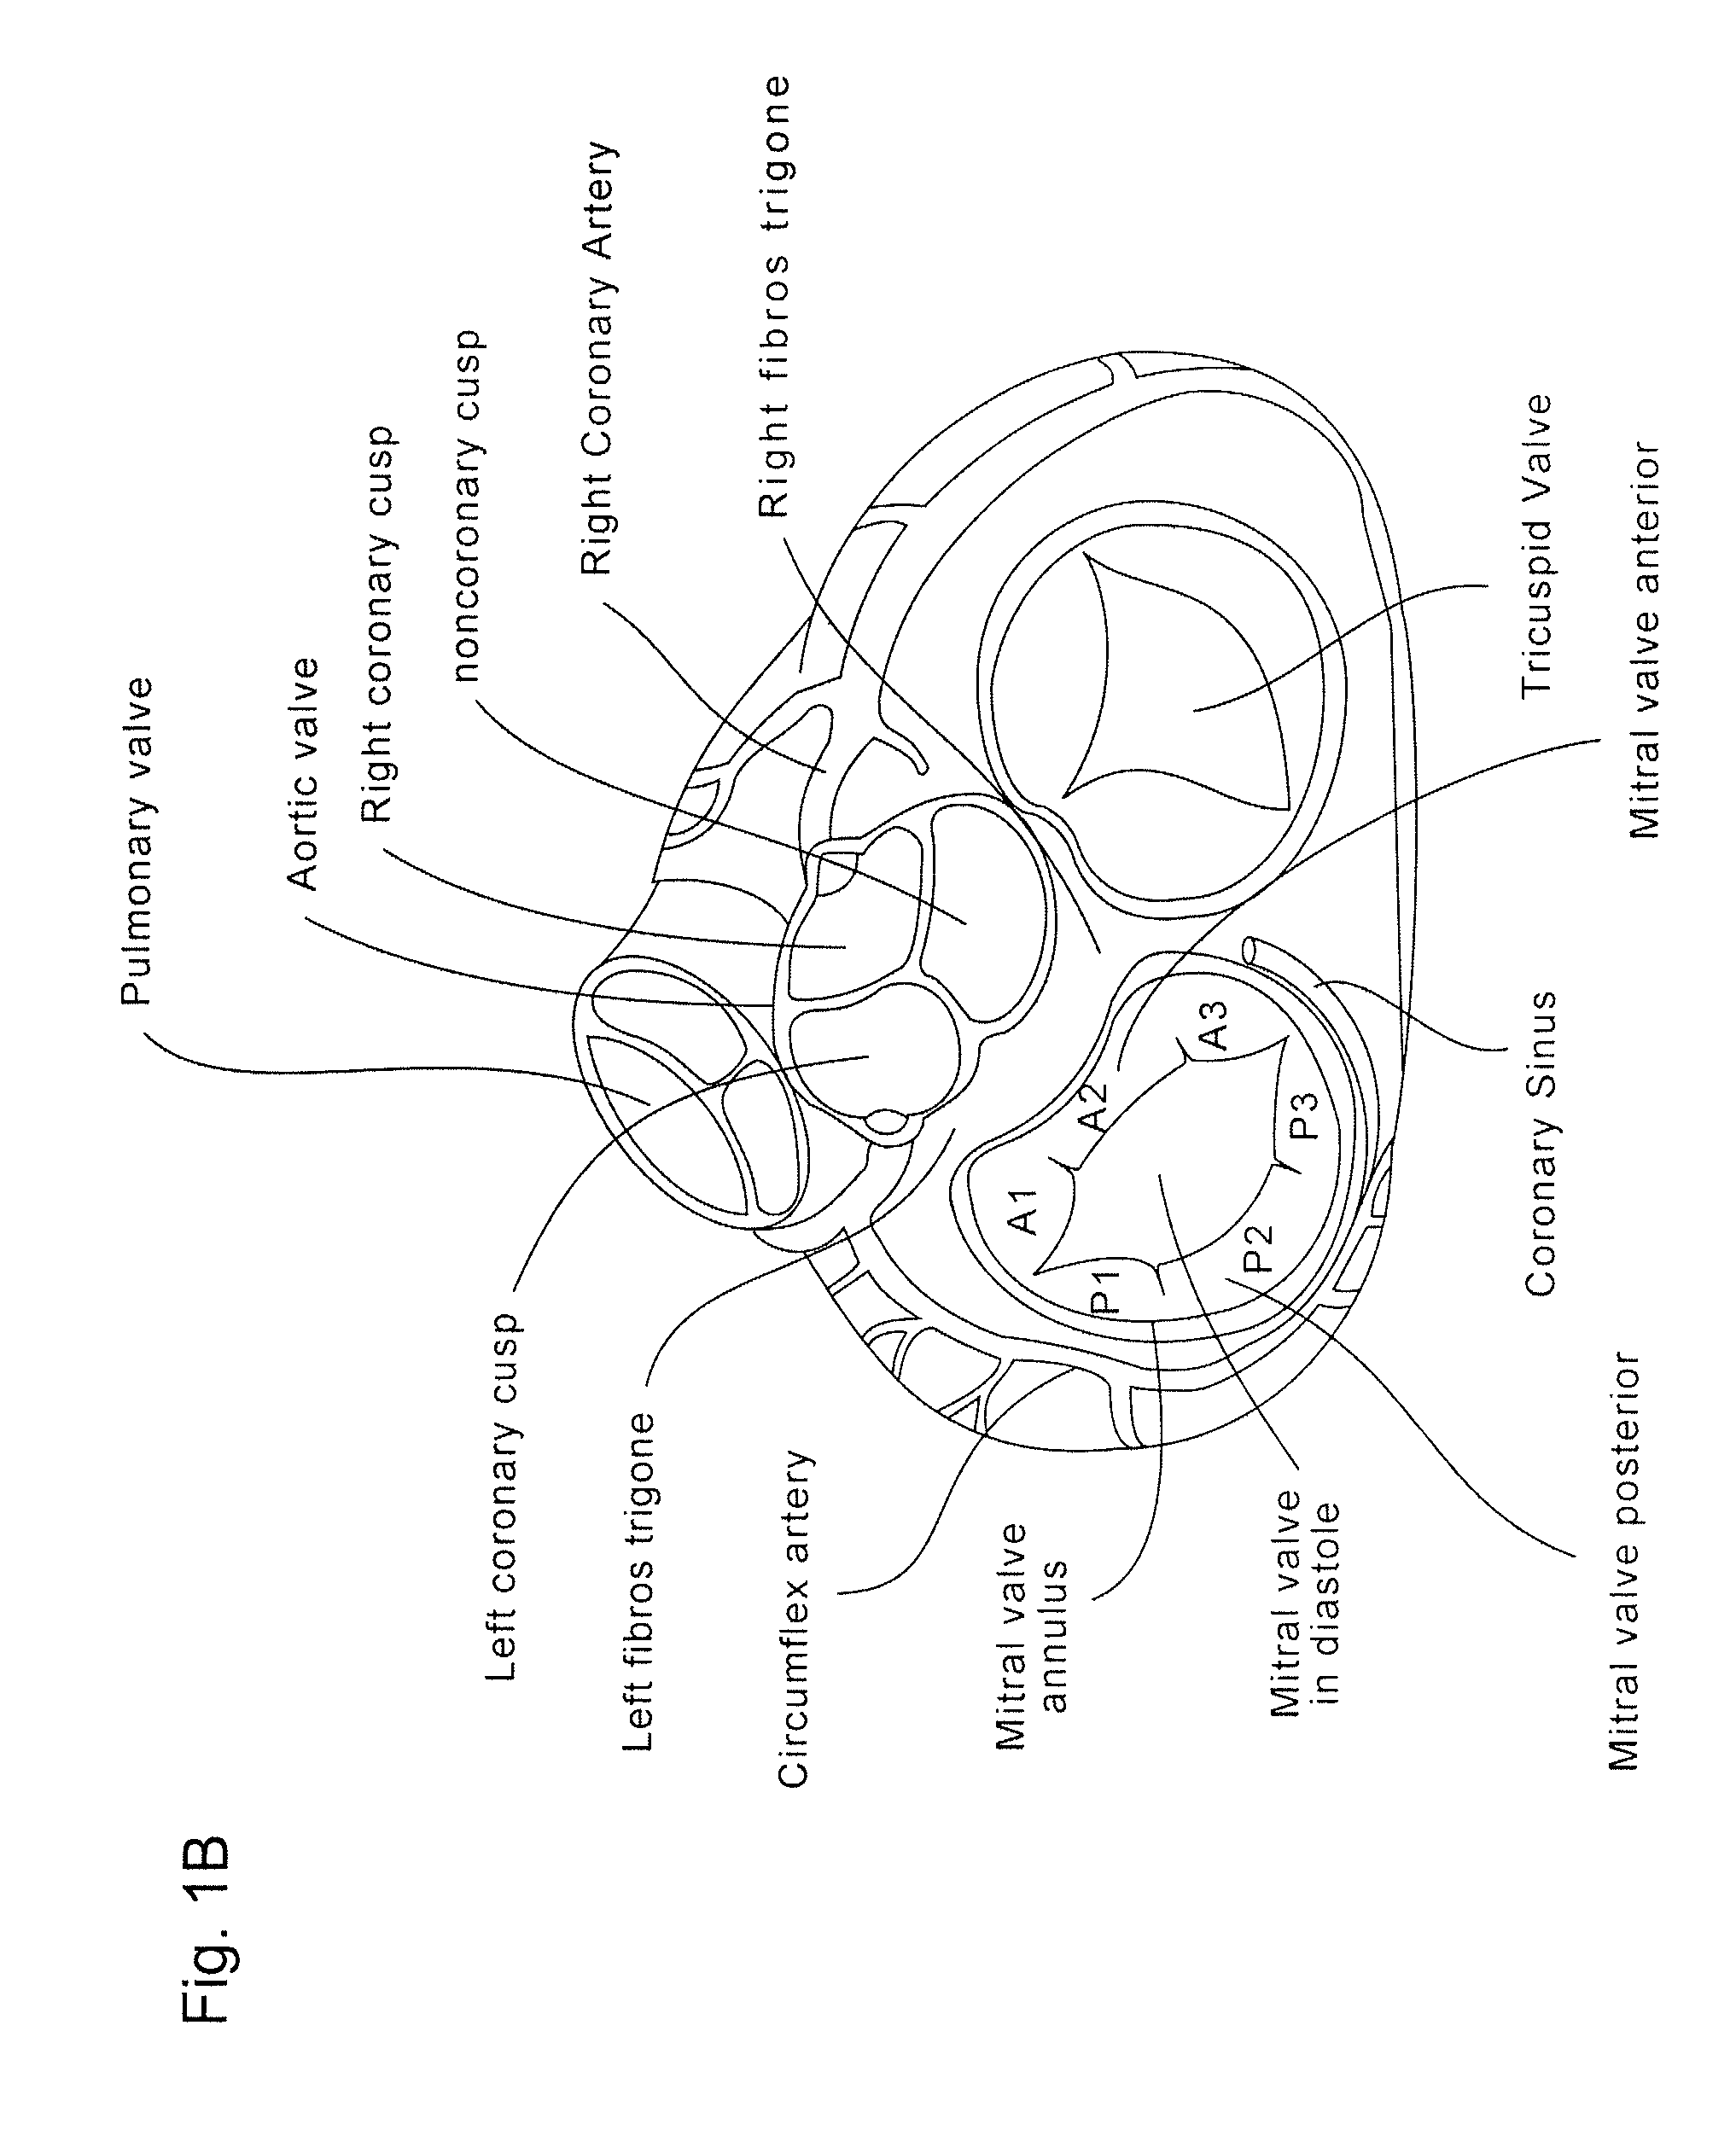 Coaptation enhancement implant, system, and method